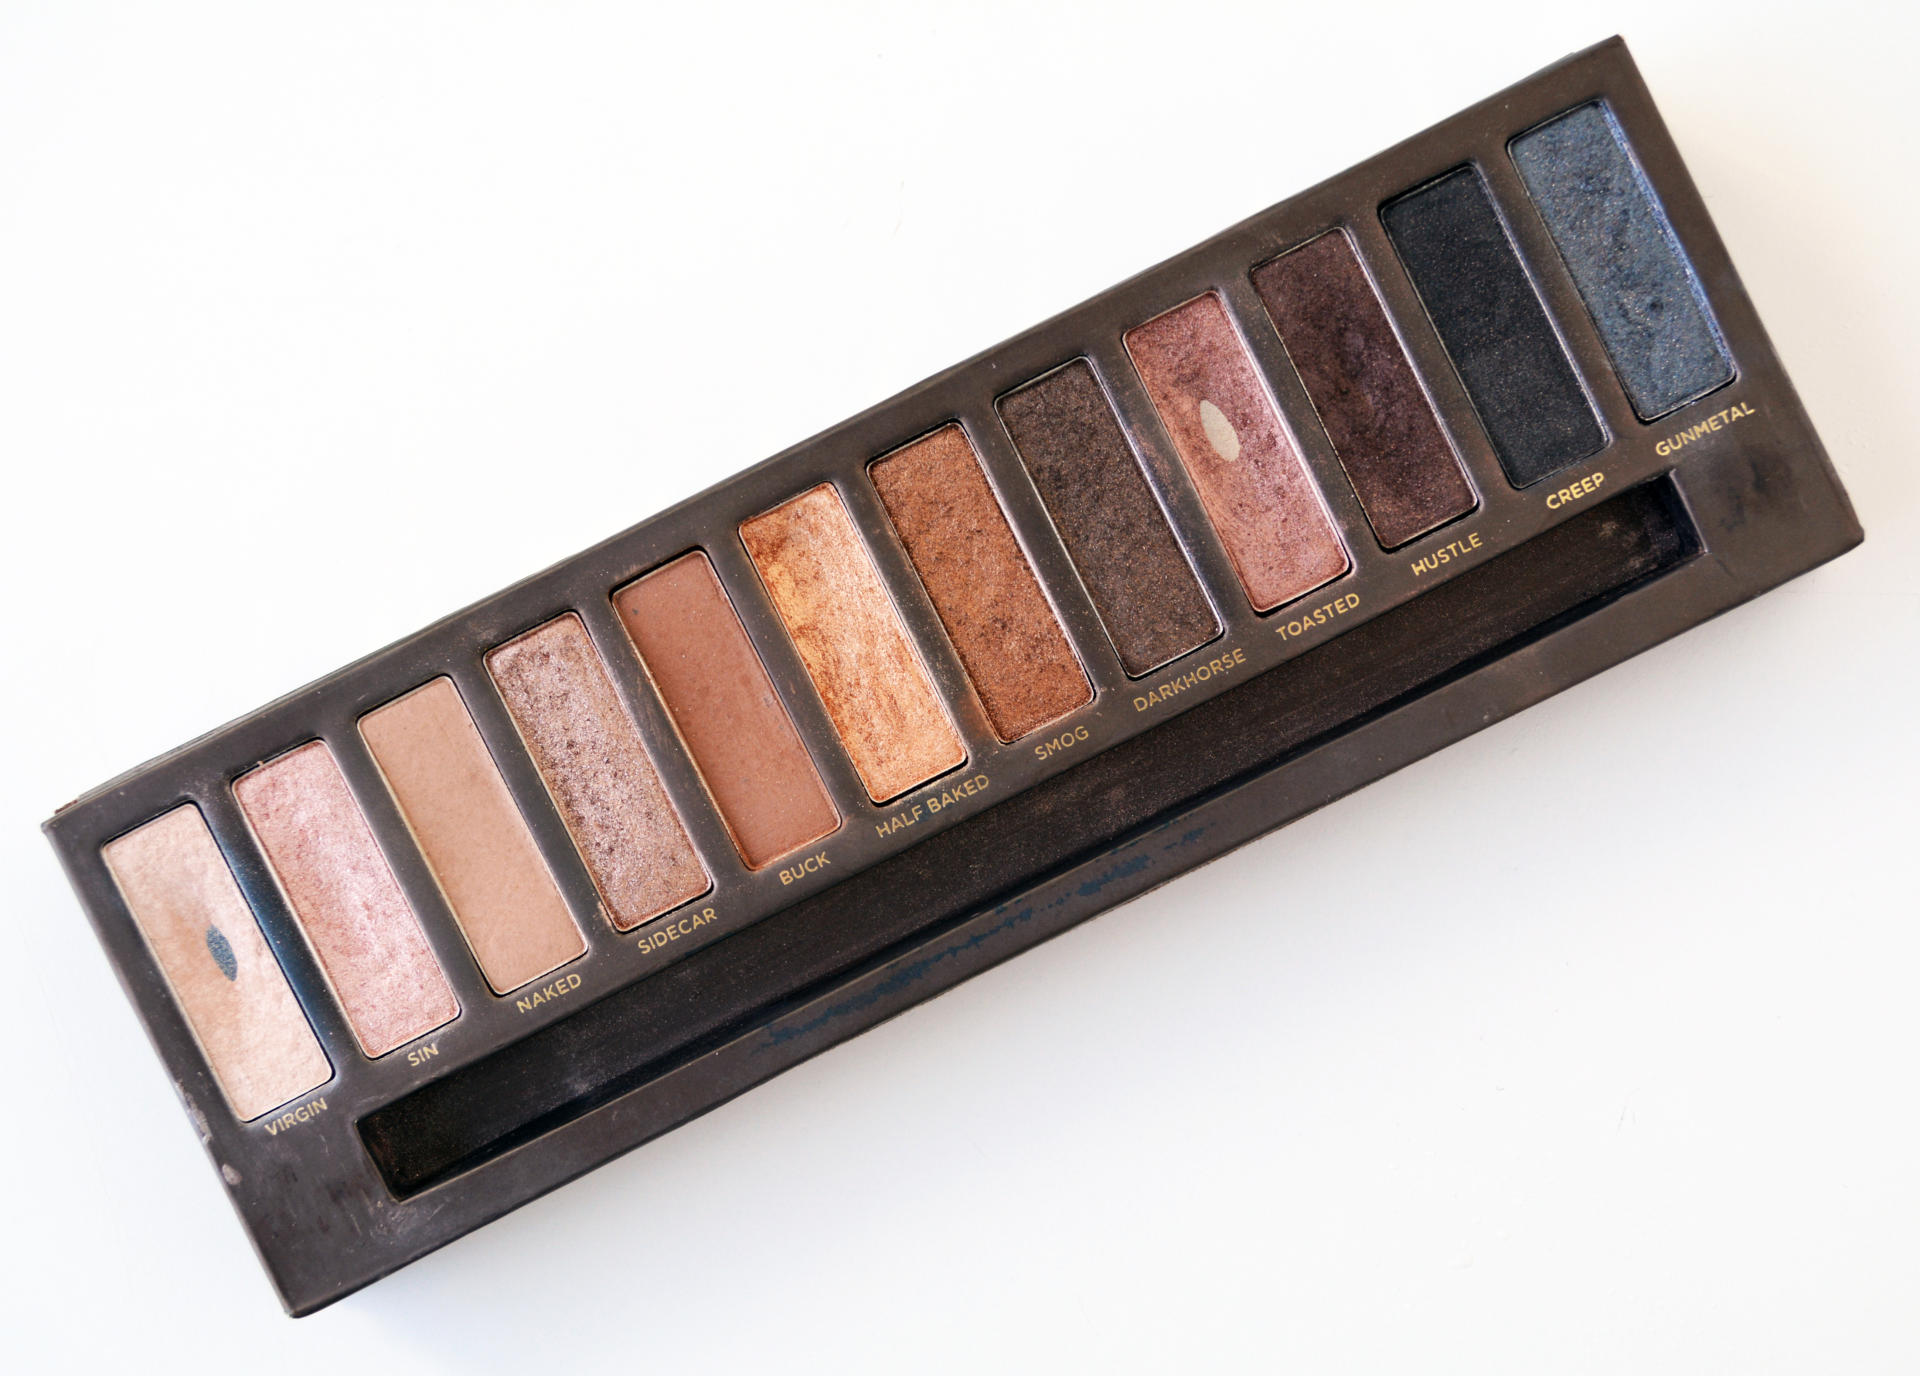 Urban Decay Naked Palette 